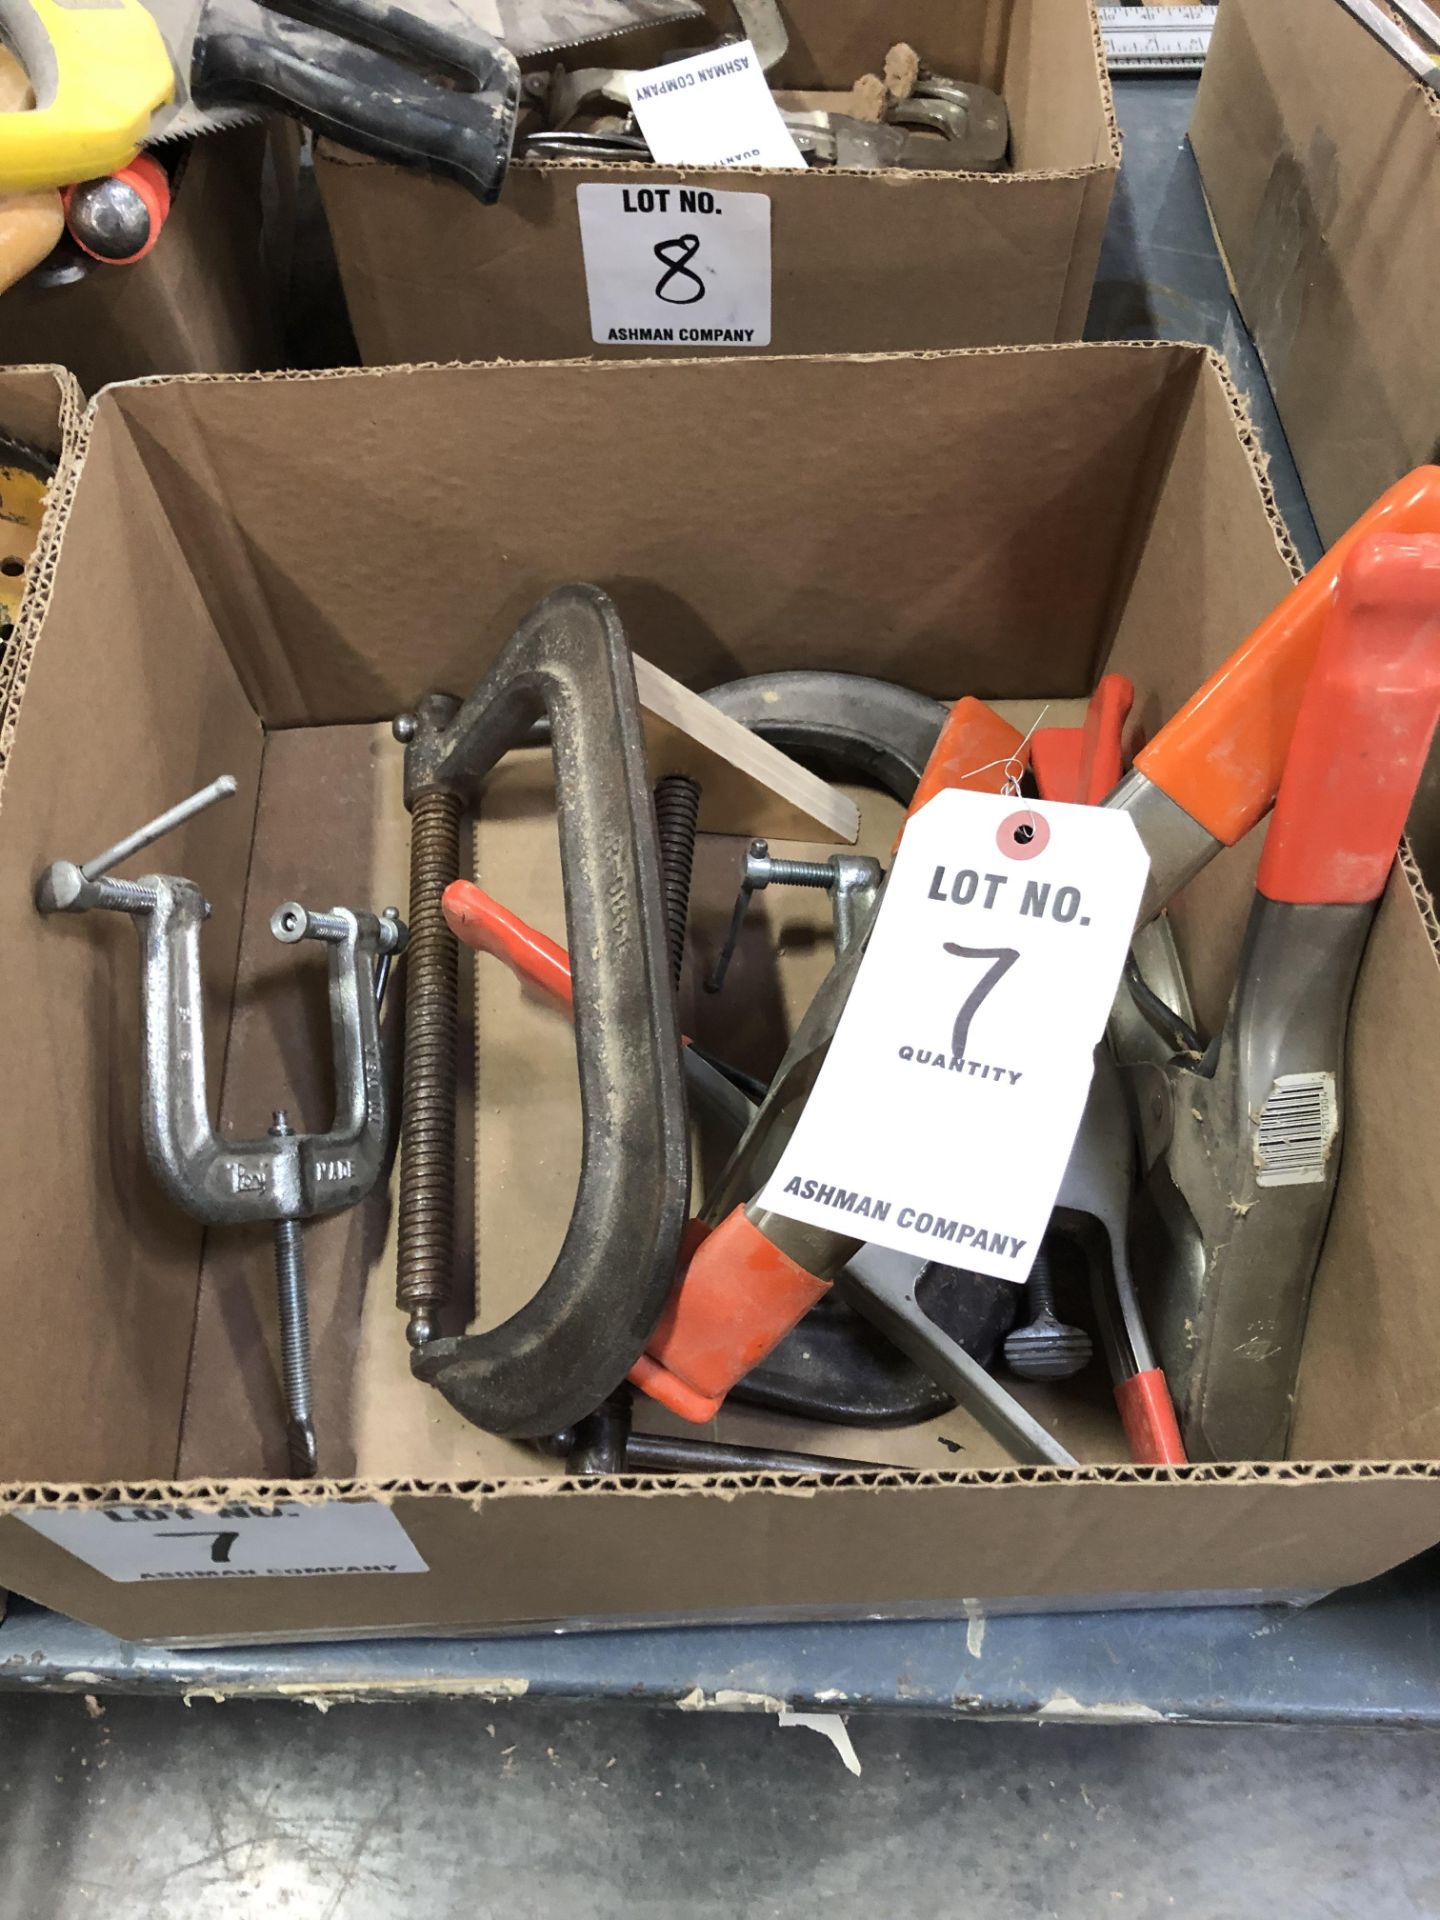 Lot: Pinch Clamps, C-Clamps